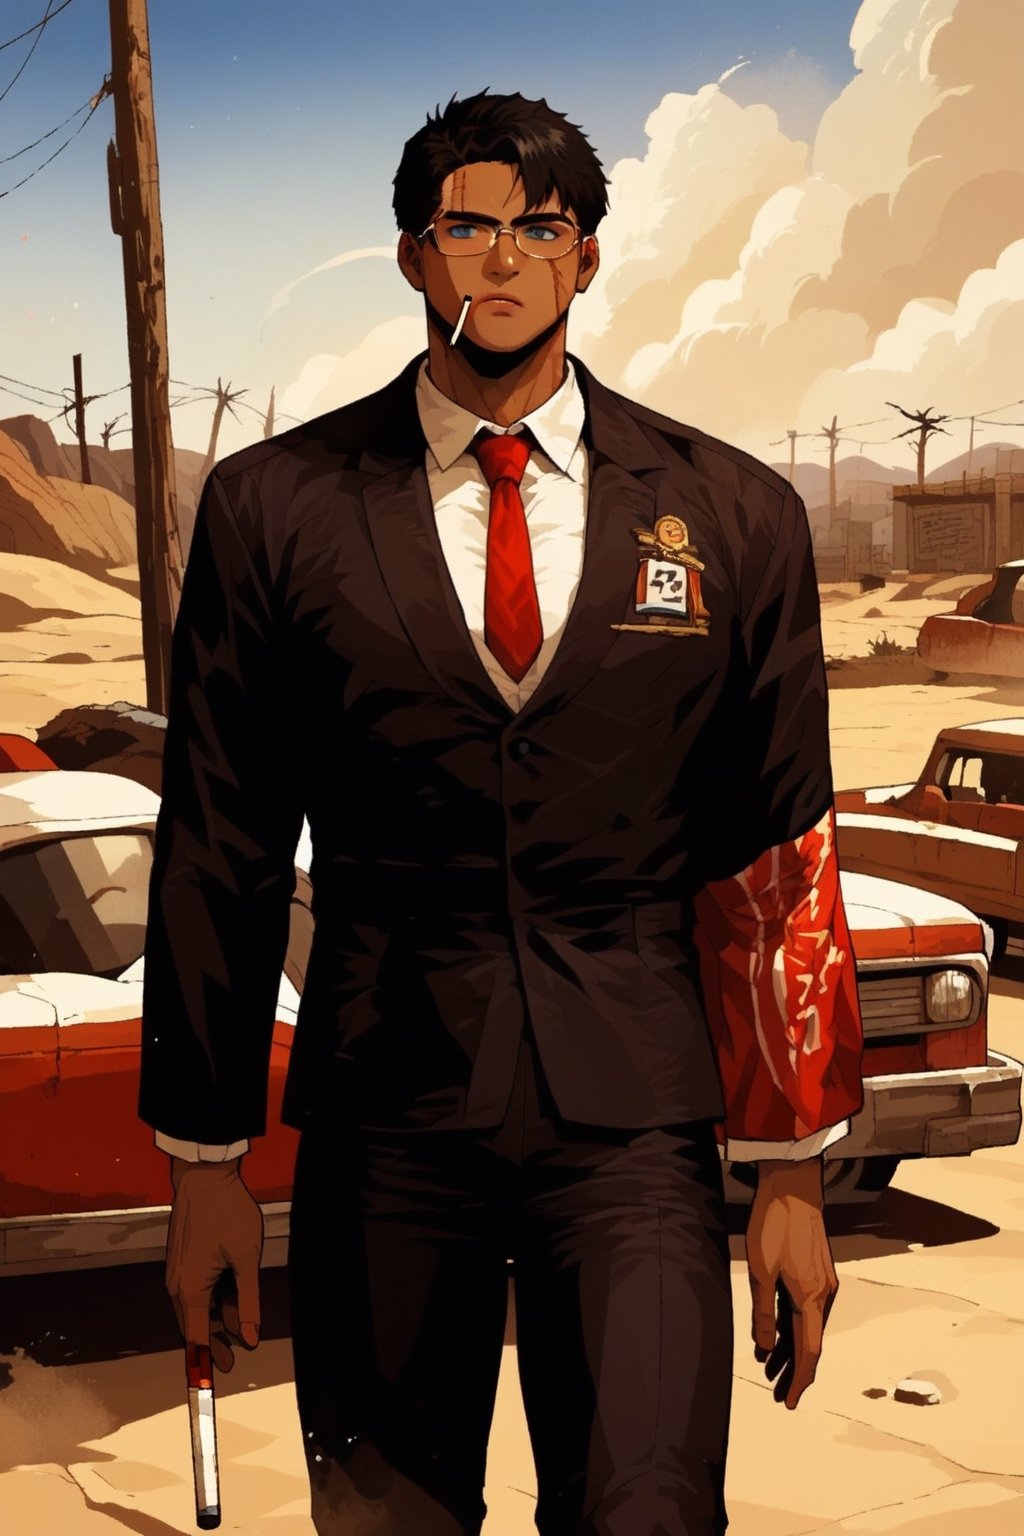 score_9, score_8, score_7, score_8_up, 1man(young, 20 year old, handsome, masculine, wearing black business suit with red tie and cowbow hat, glasses, pip-boy on his left arm, tanned skin, scars, short black hair, tall, muscles, strong jaw, sharp cheekbones, thin lips, blue eyes, bored expression), smoking a cigarette, behind his classic car, night, outdoor, mojave desert, retro futurism, score_7_up,fallout,